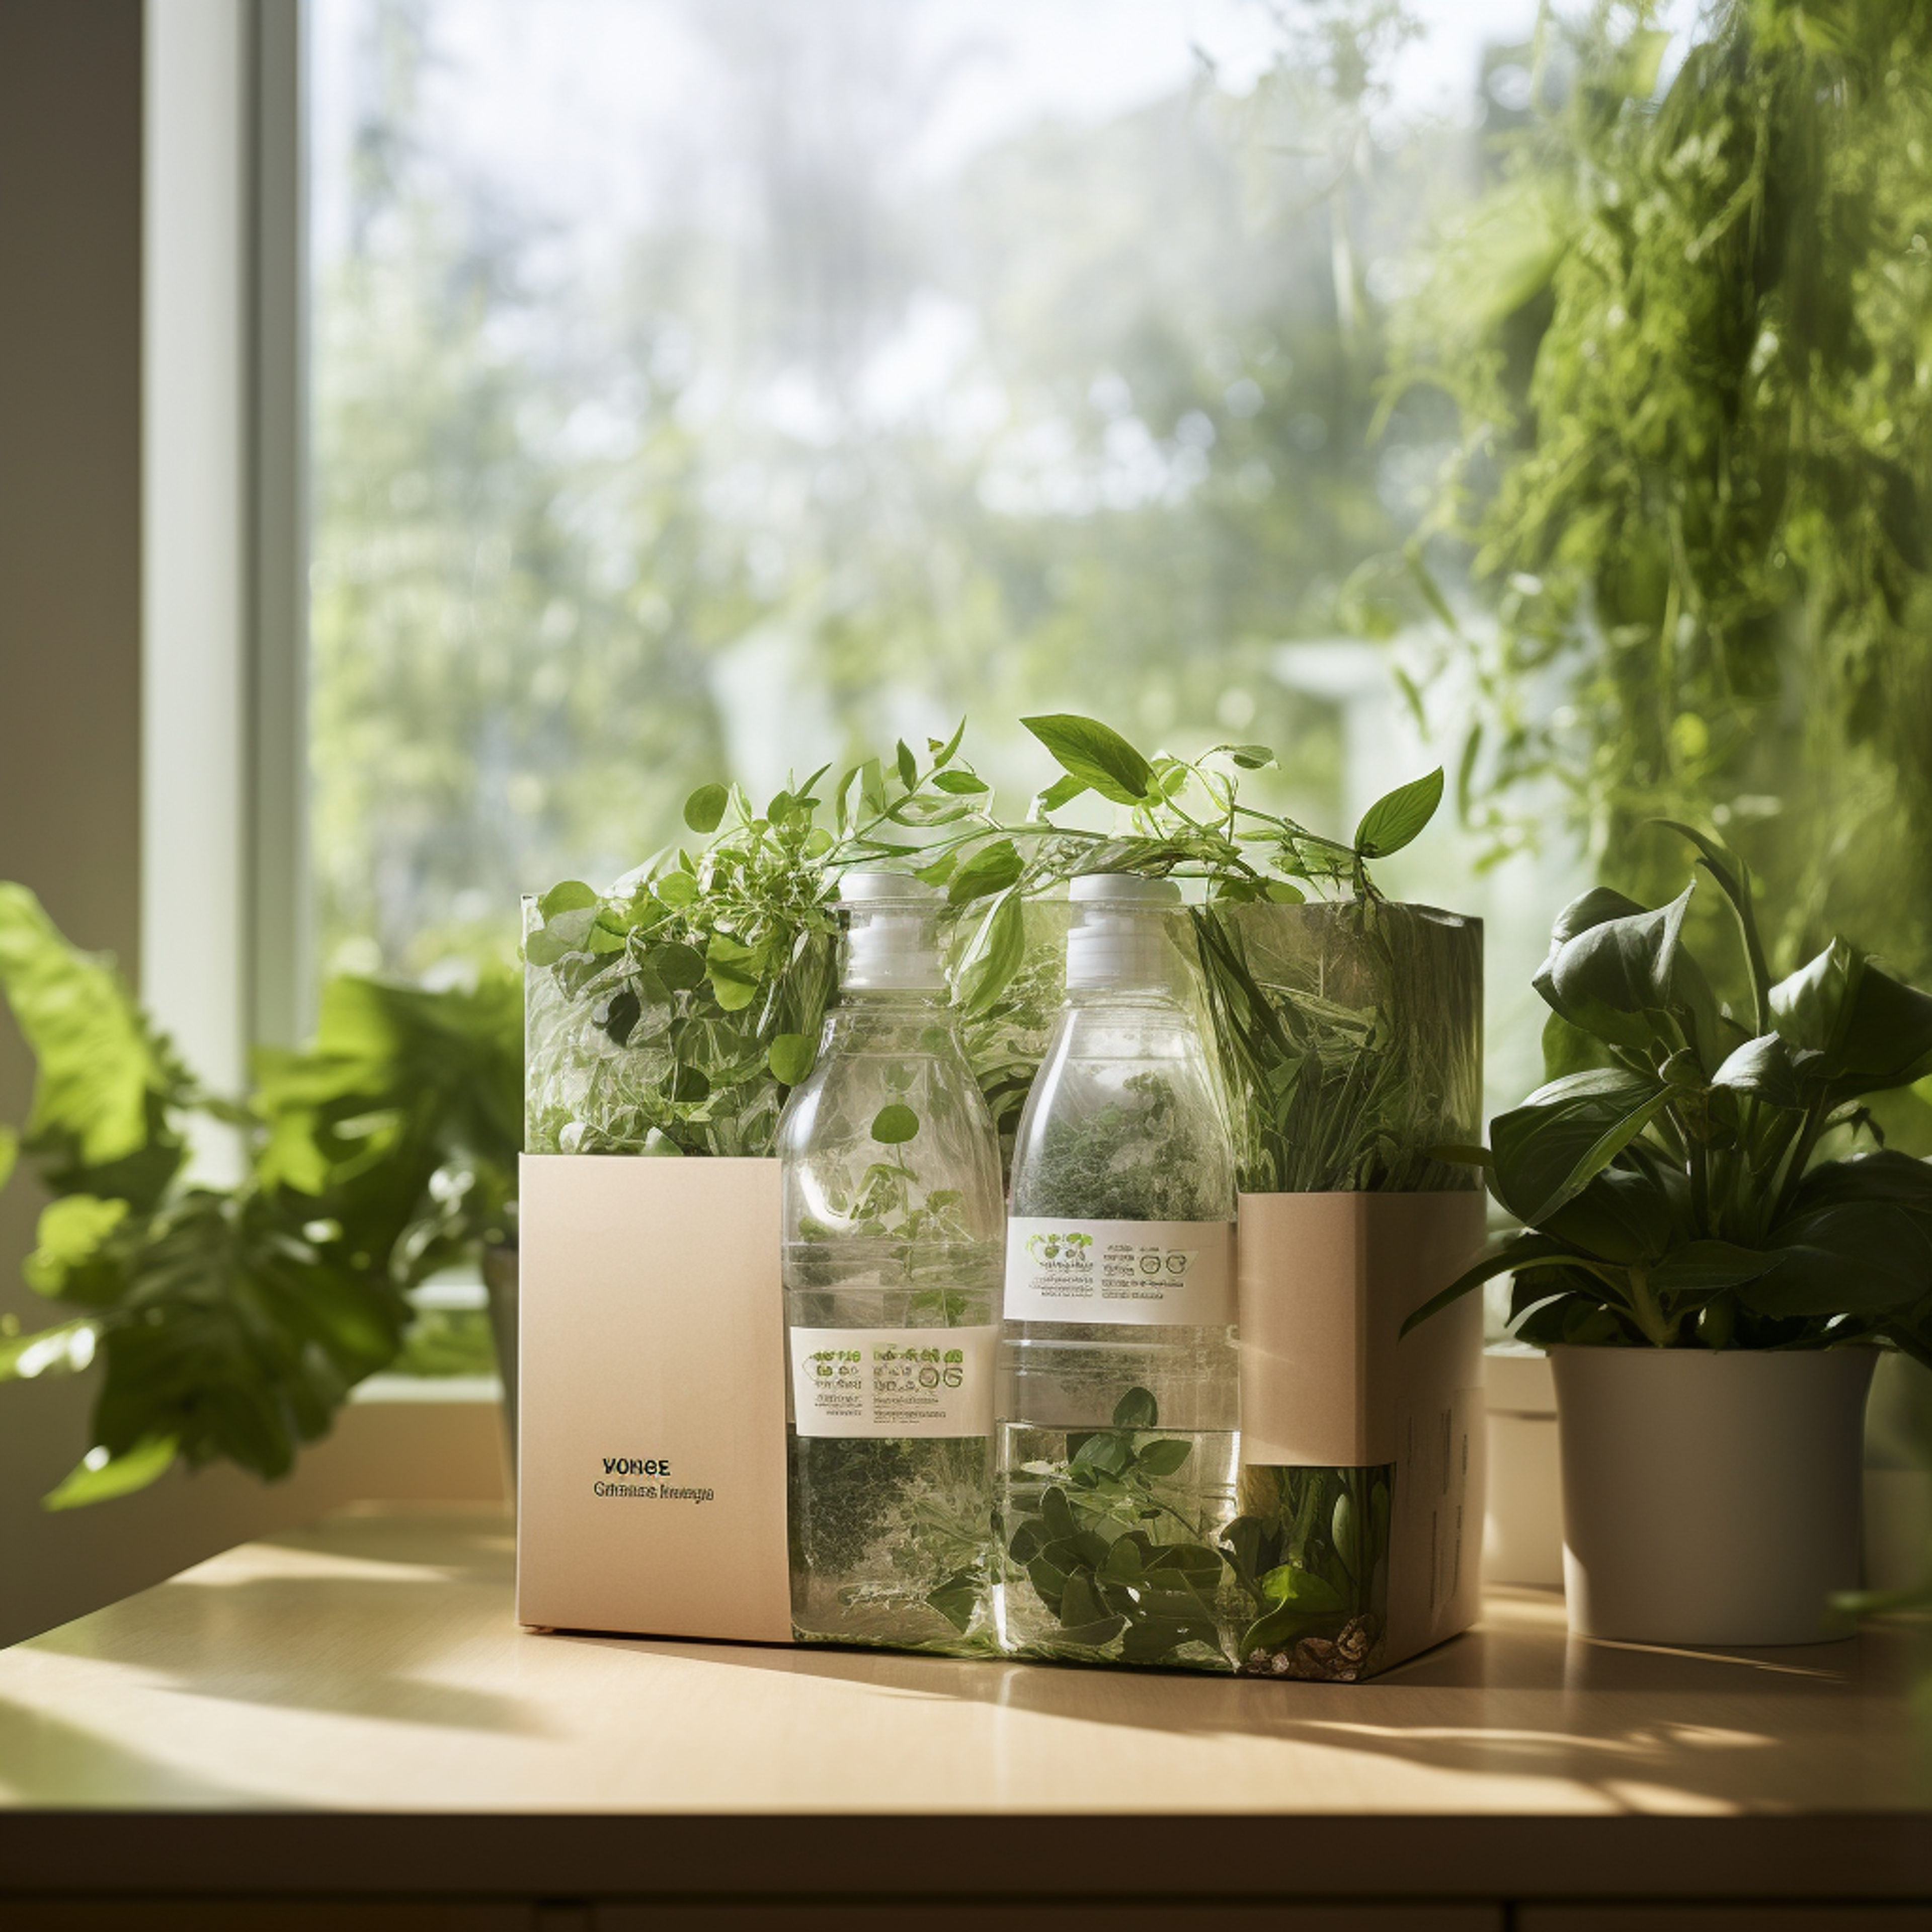 A picture of branded products of plants and greens on a shelf